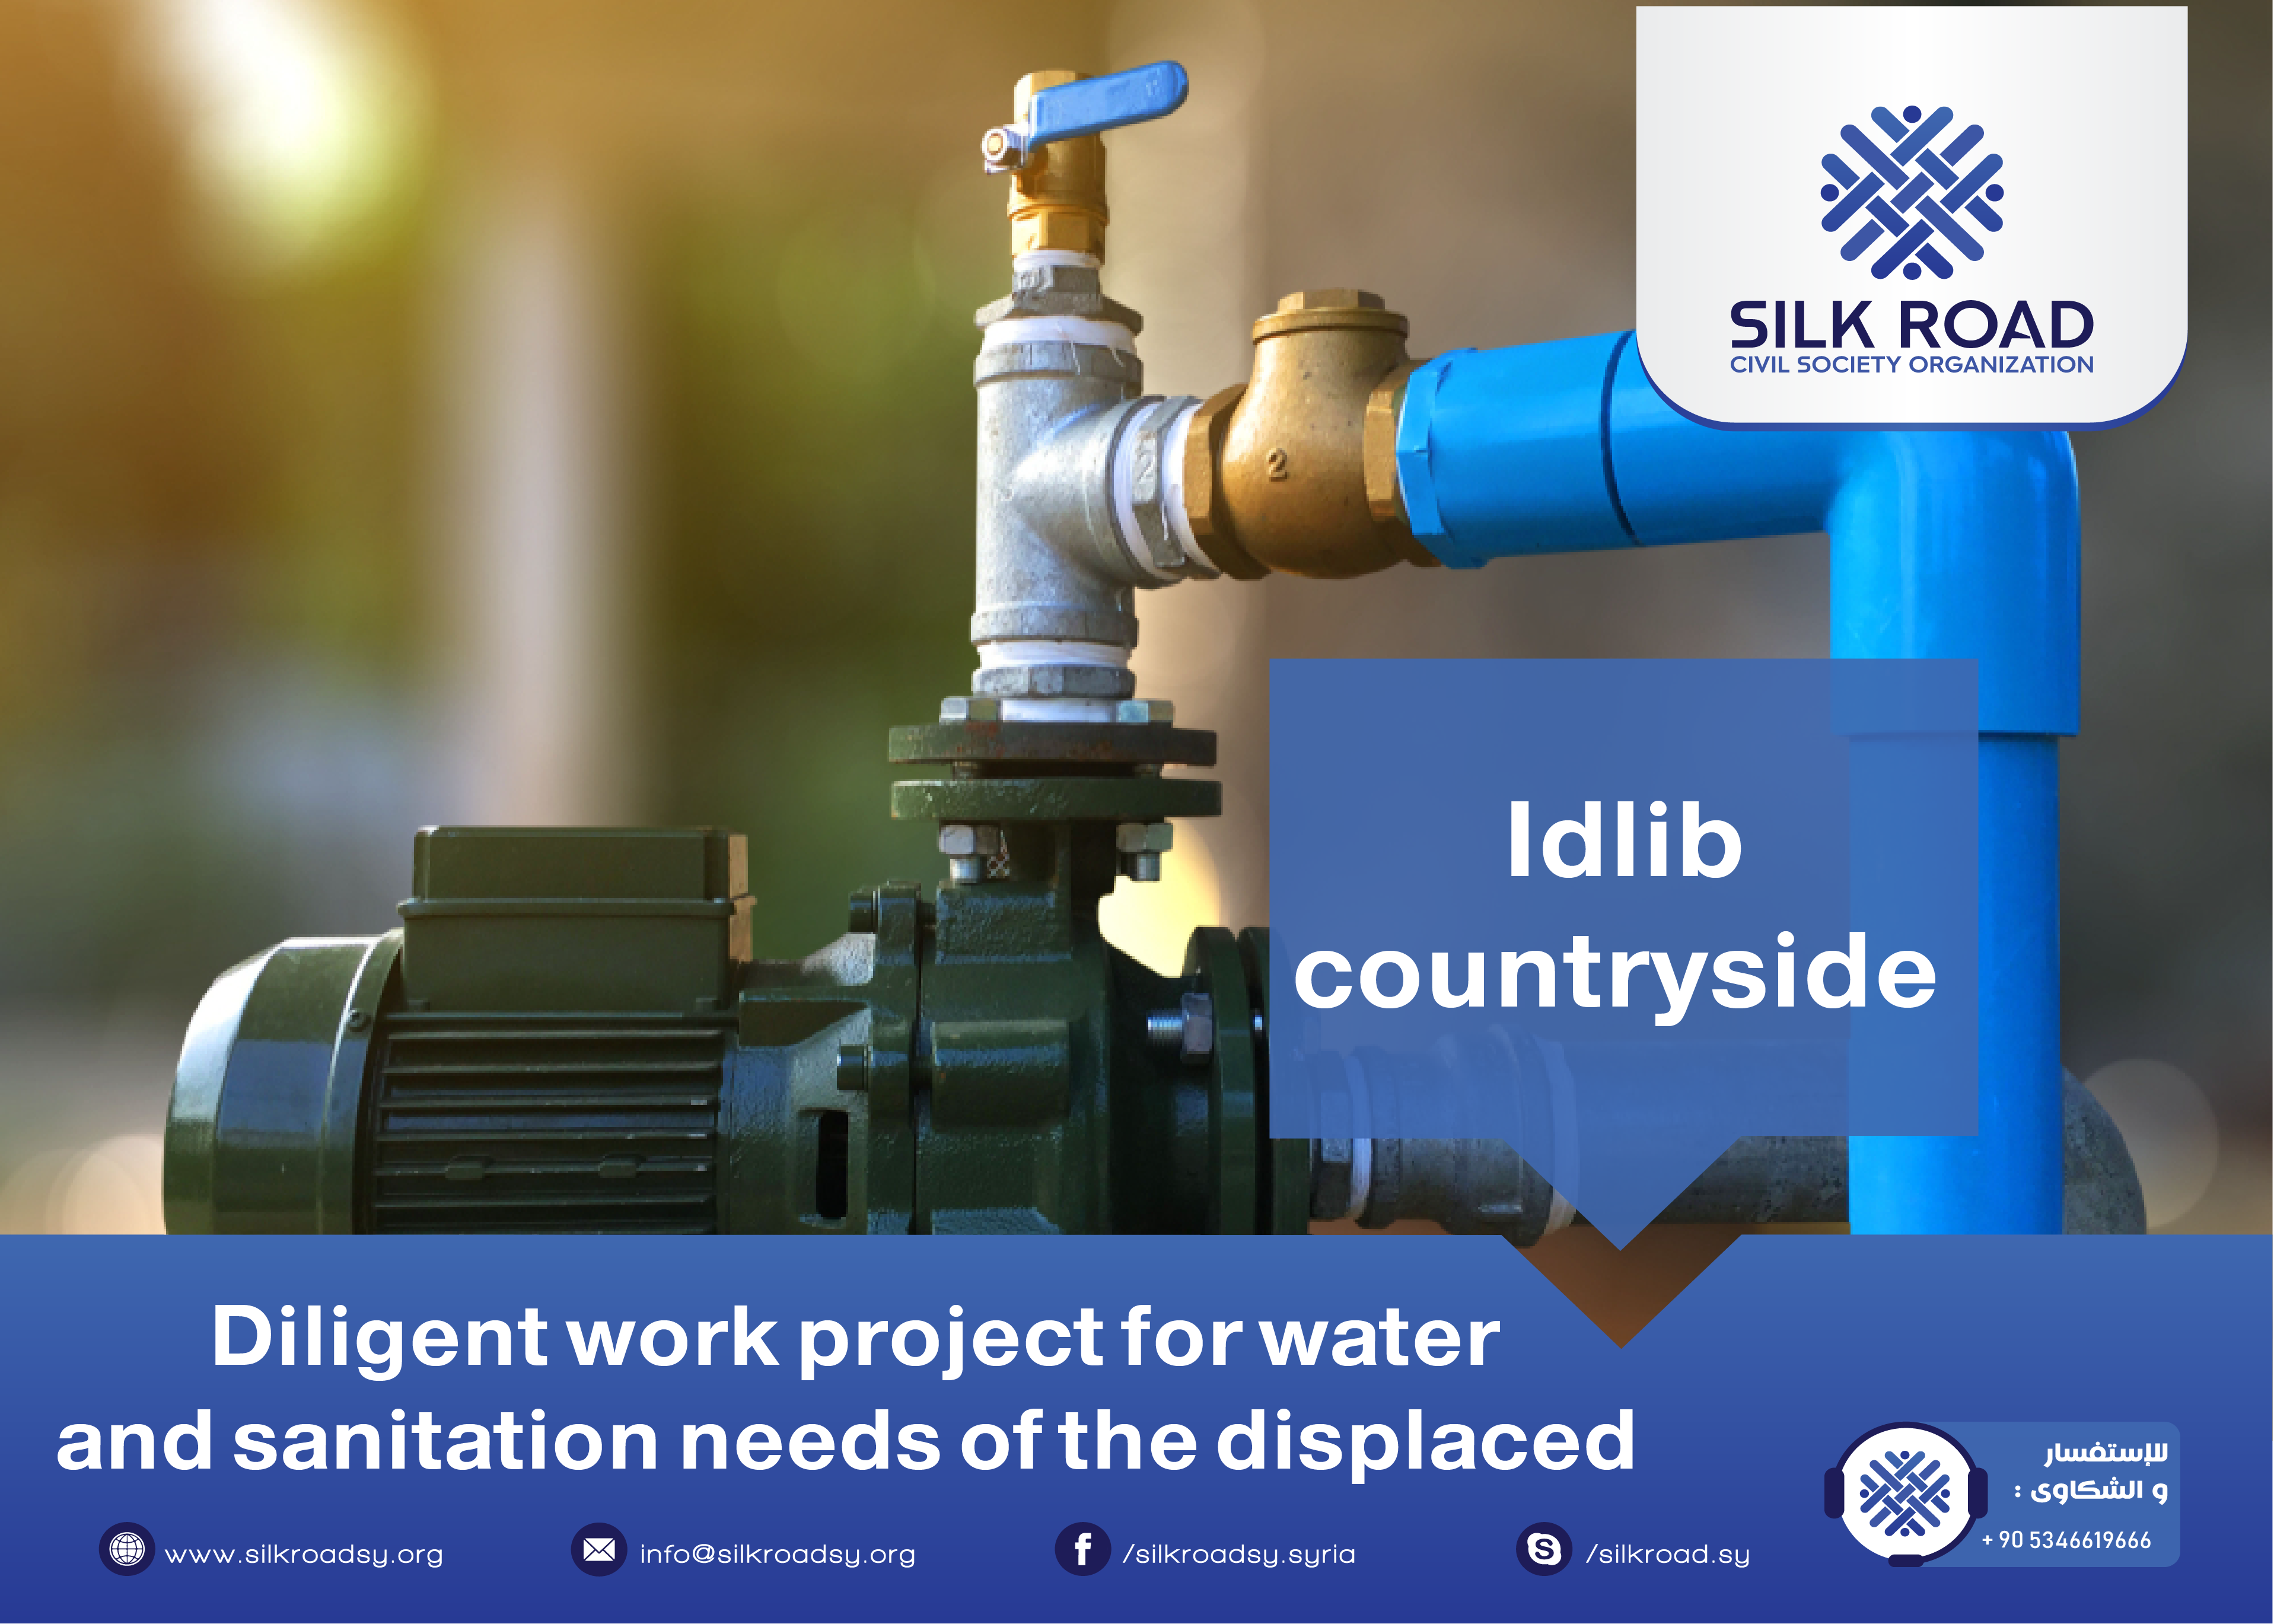 Diligent work project for water and sanitation needs of the displaced